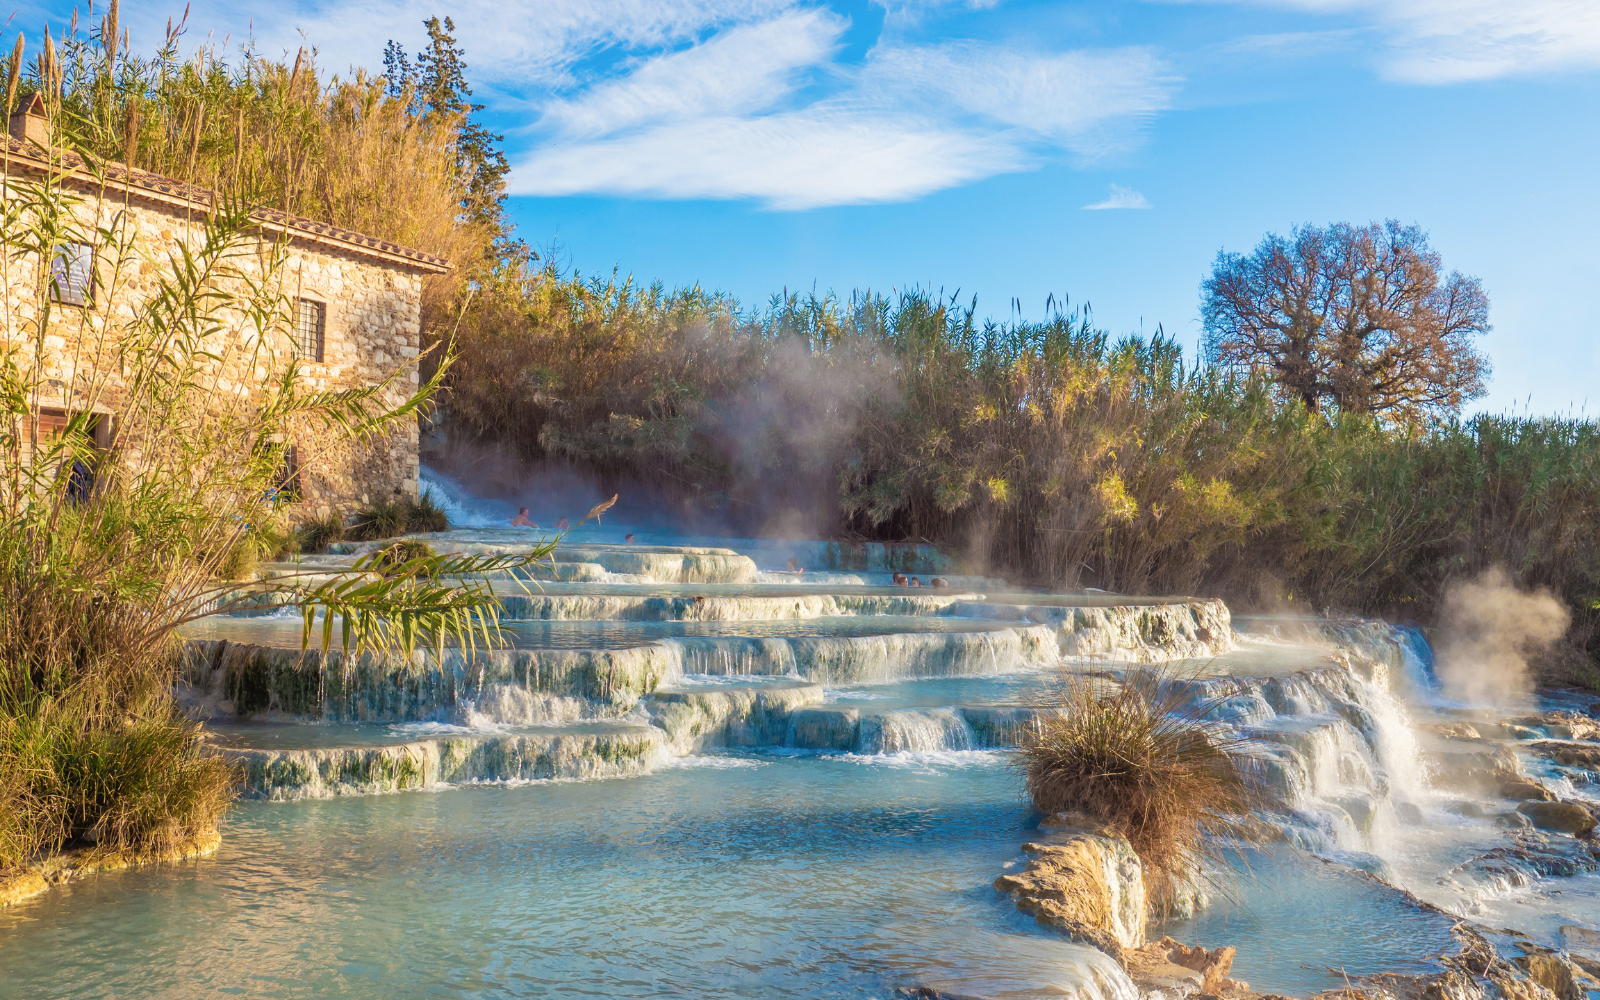 Wellness spots in Tuscany: 4 free spas to regenerate